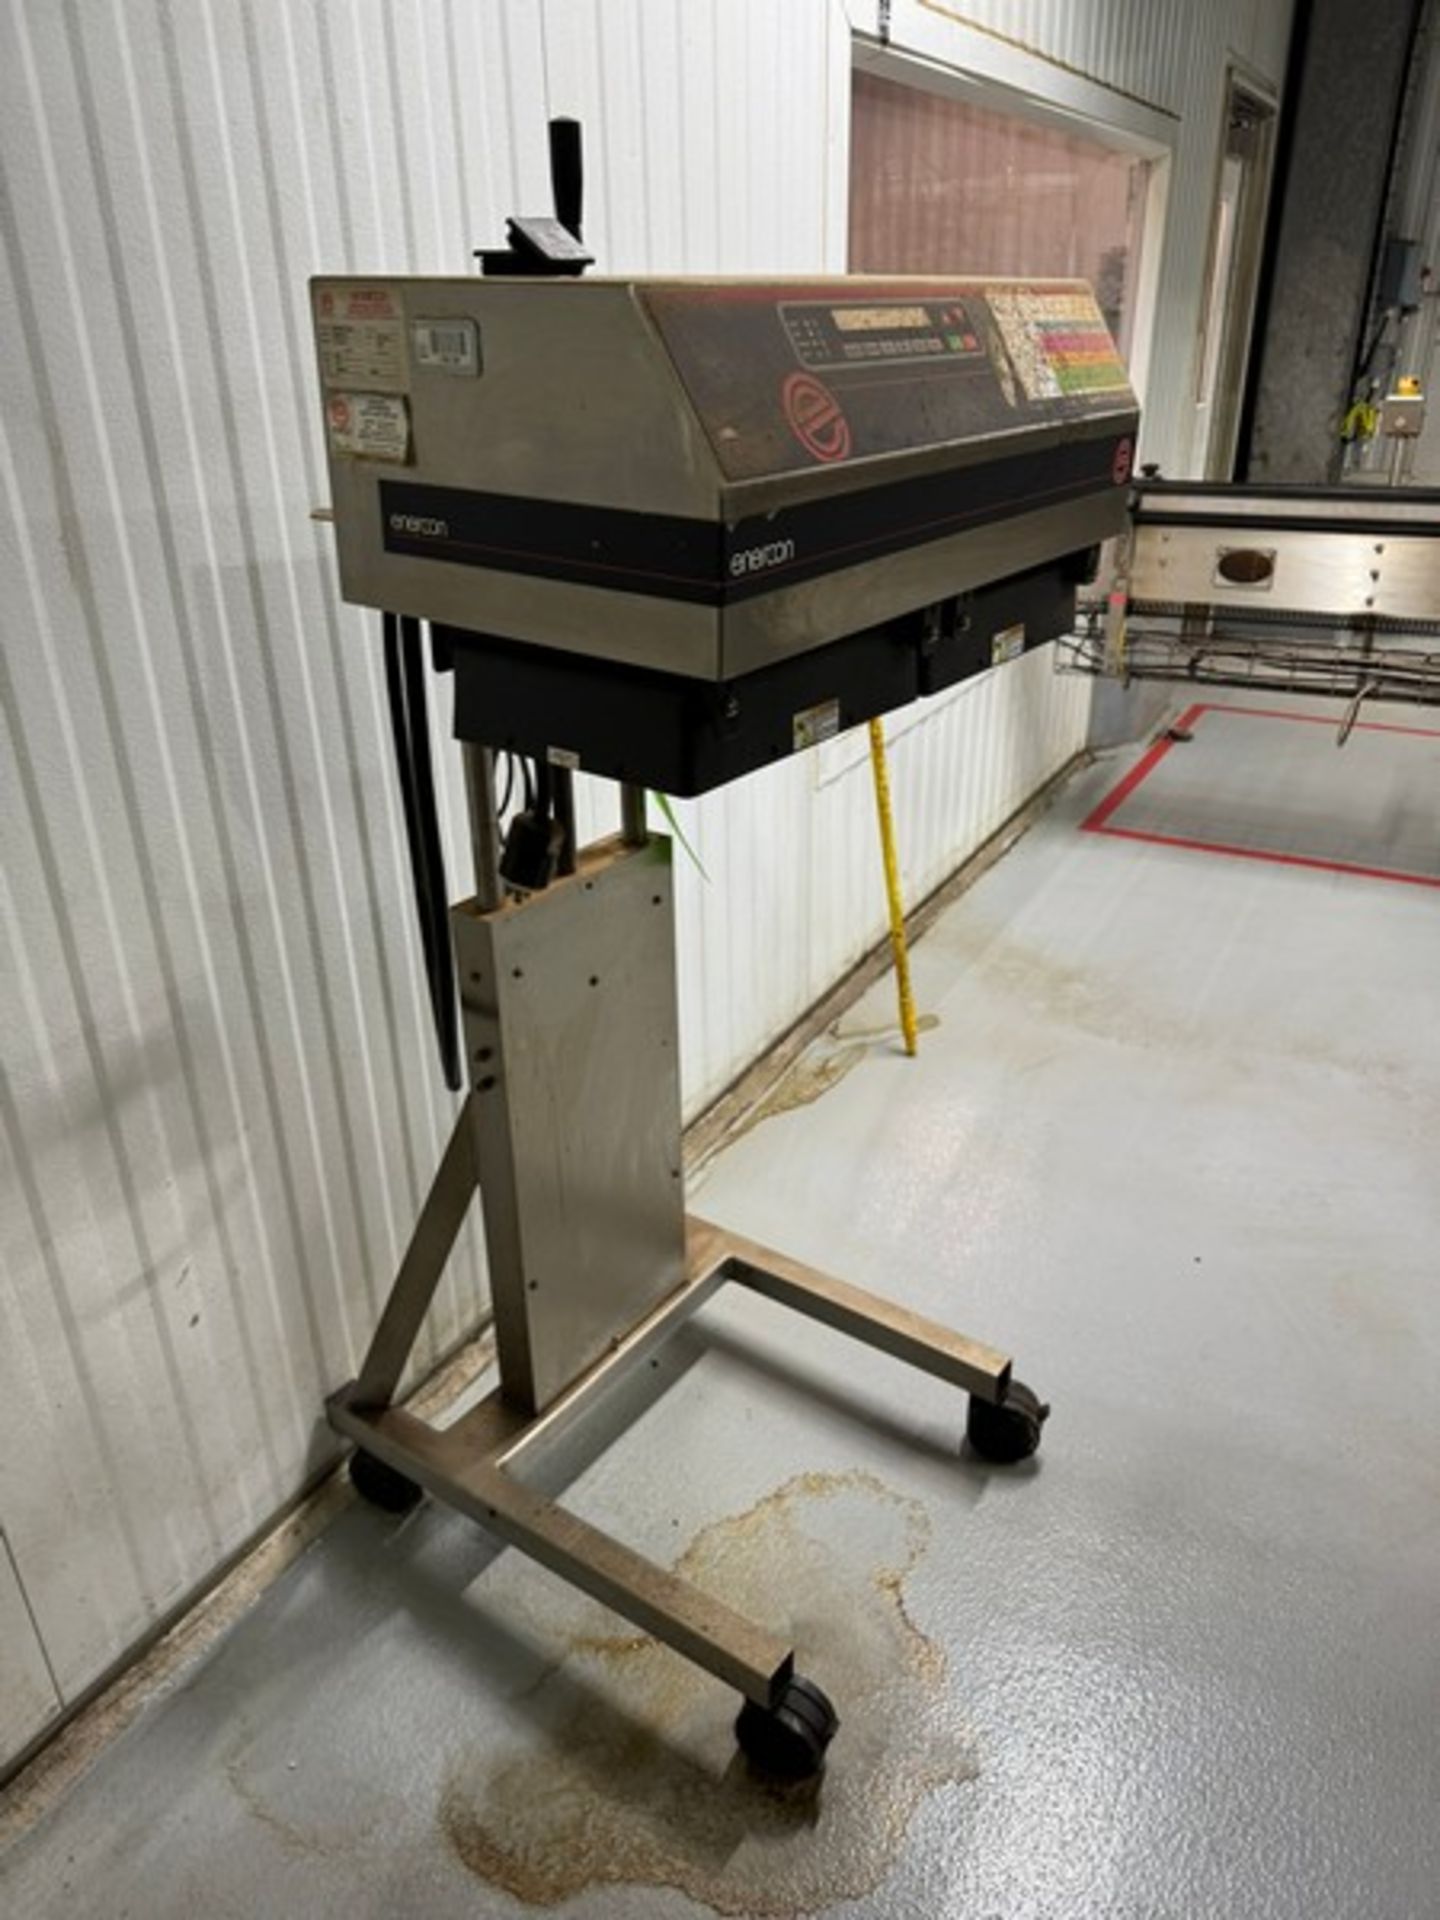 2014 Emerson Superseal Max Sealer, M/N LM4989-46, S/N 111756-2-1, 208 Volts, Mounted on Portable - Image 2 of 4